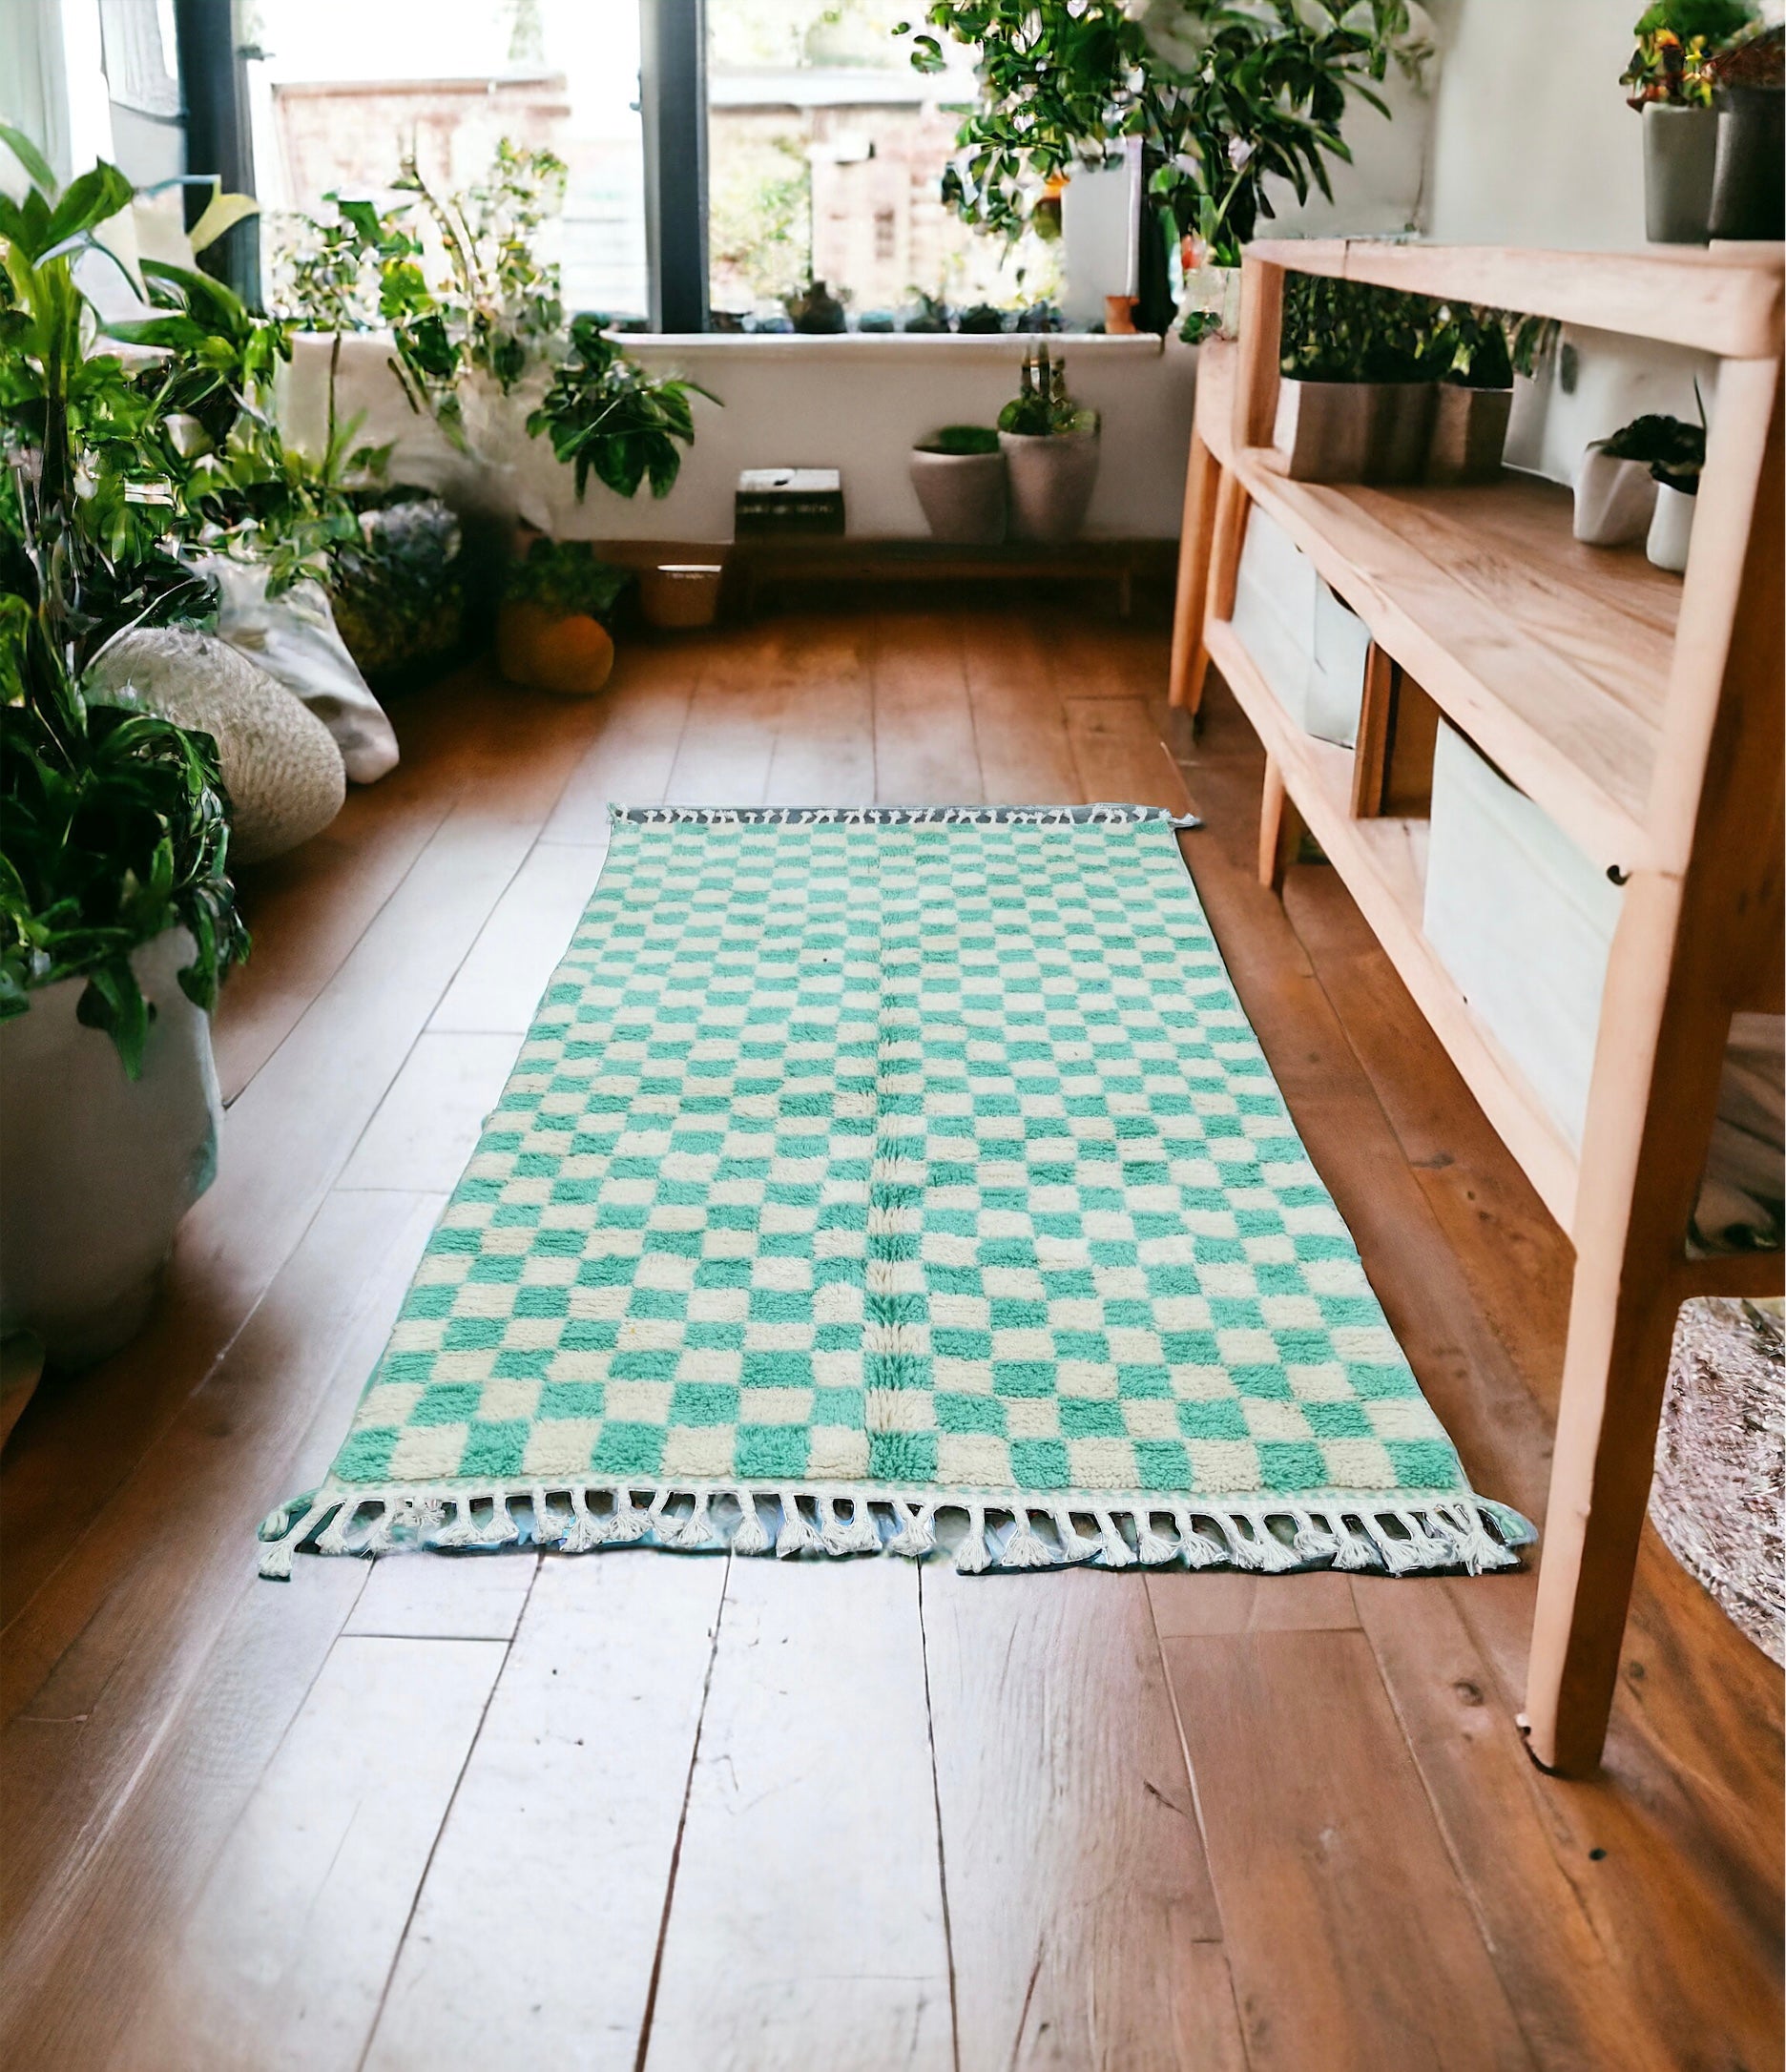 Cleo Rug - Checkered - Knotted Weave